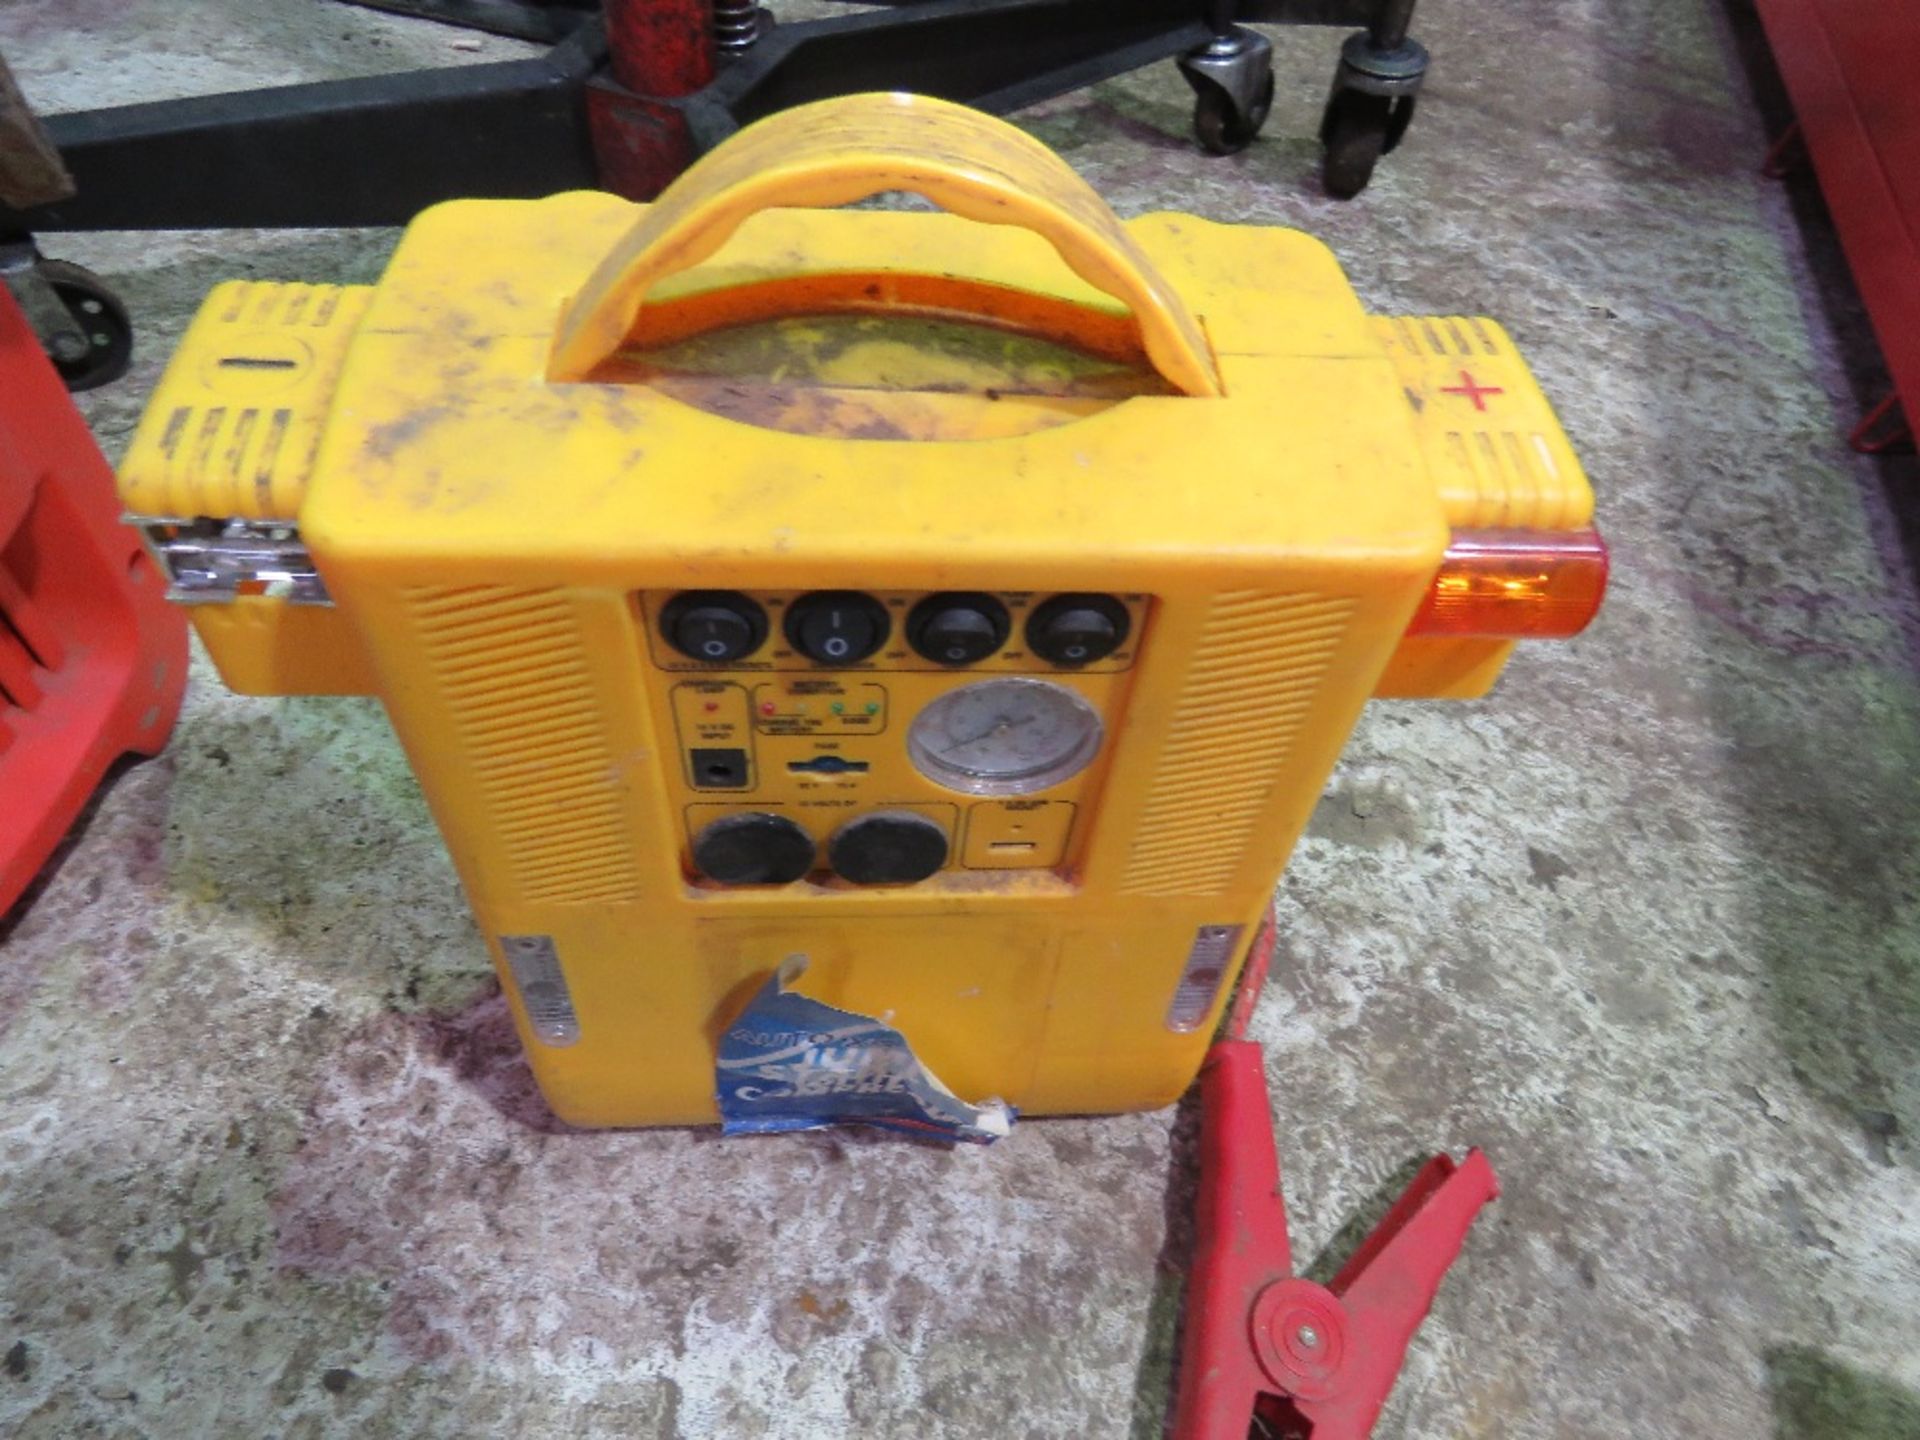 ROHR 12/24 VOLT BATTERY CHARGER PLUS A JUMP STARTER UNIT. SOURCED FROM GARAGE COMPANY LIQUIDATION. - Image 3 of 7